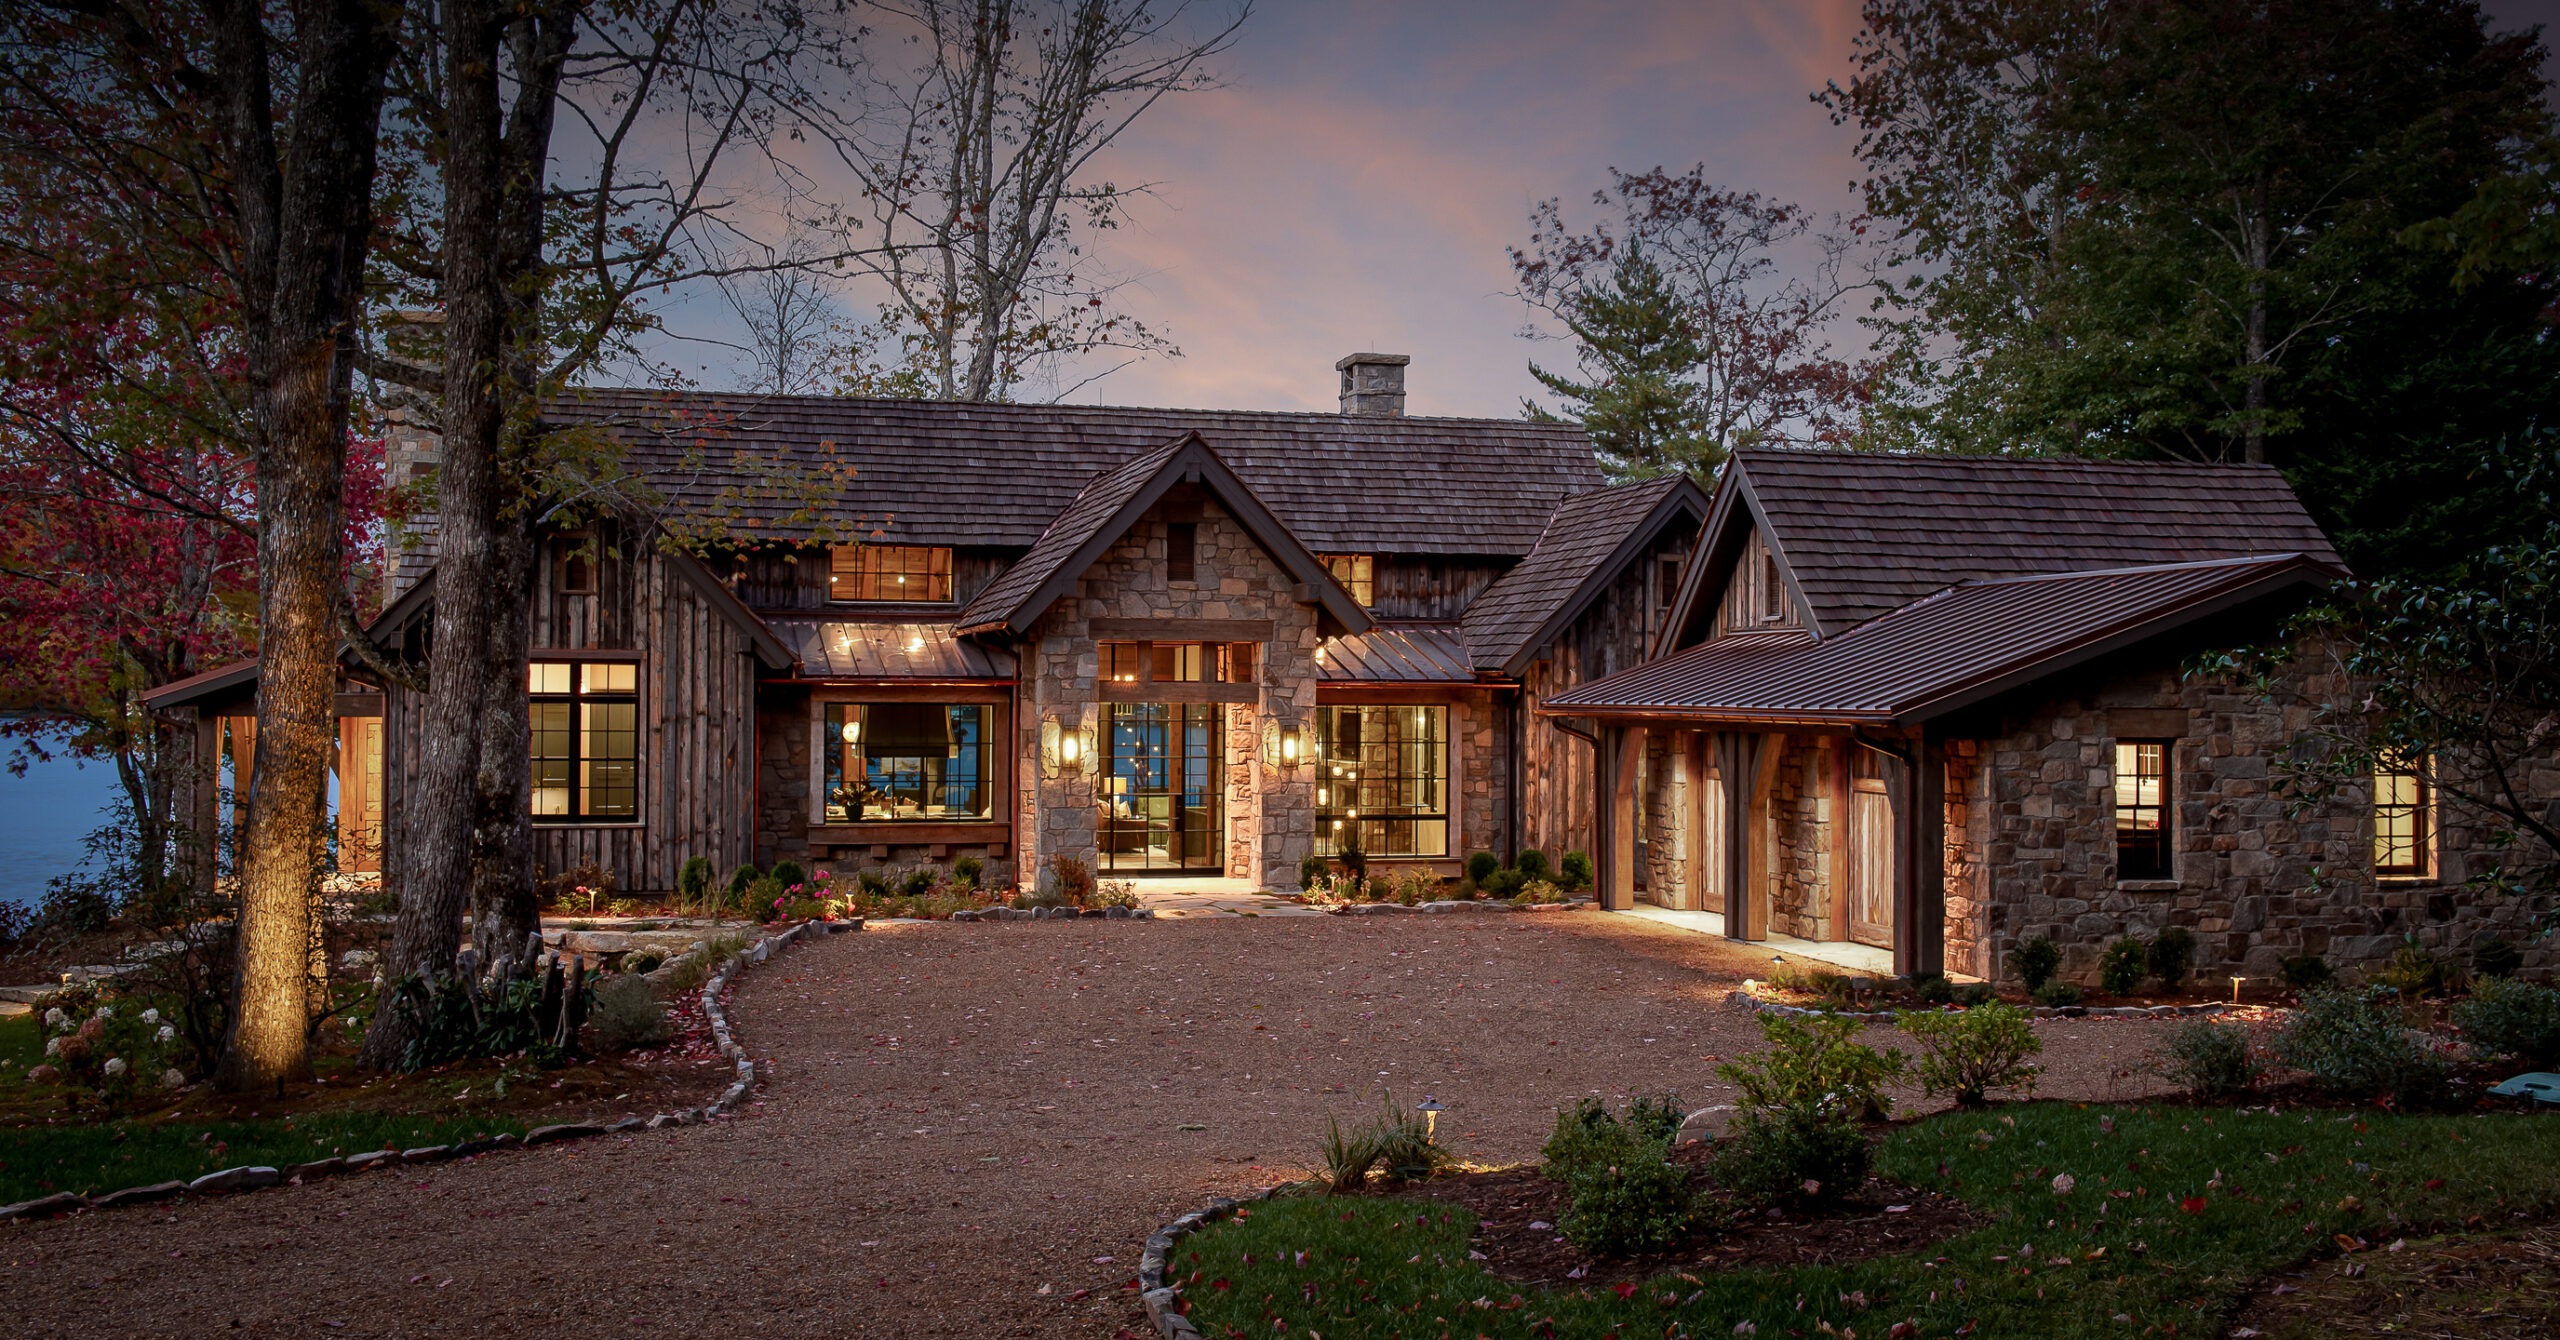 A home with a stone driveway and wood siding. captured by professional architectural photographer in South Carolina